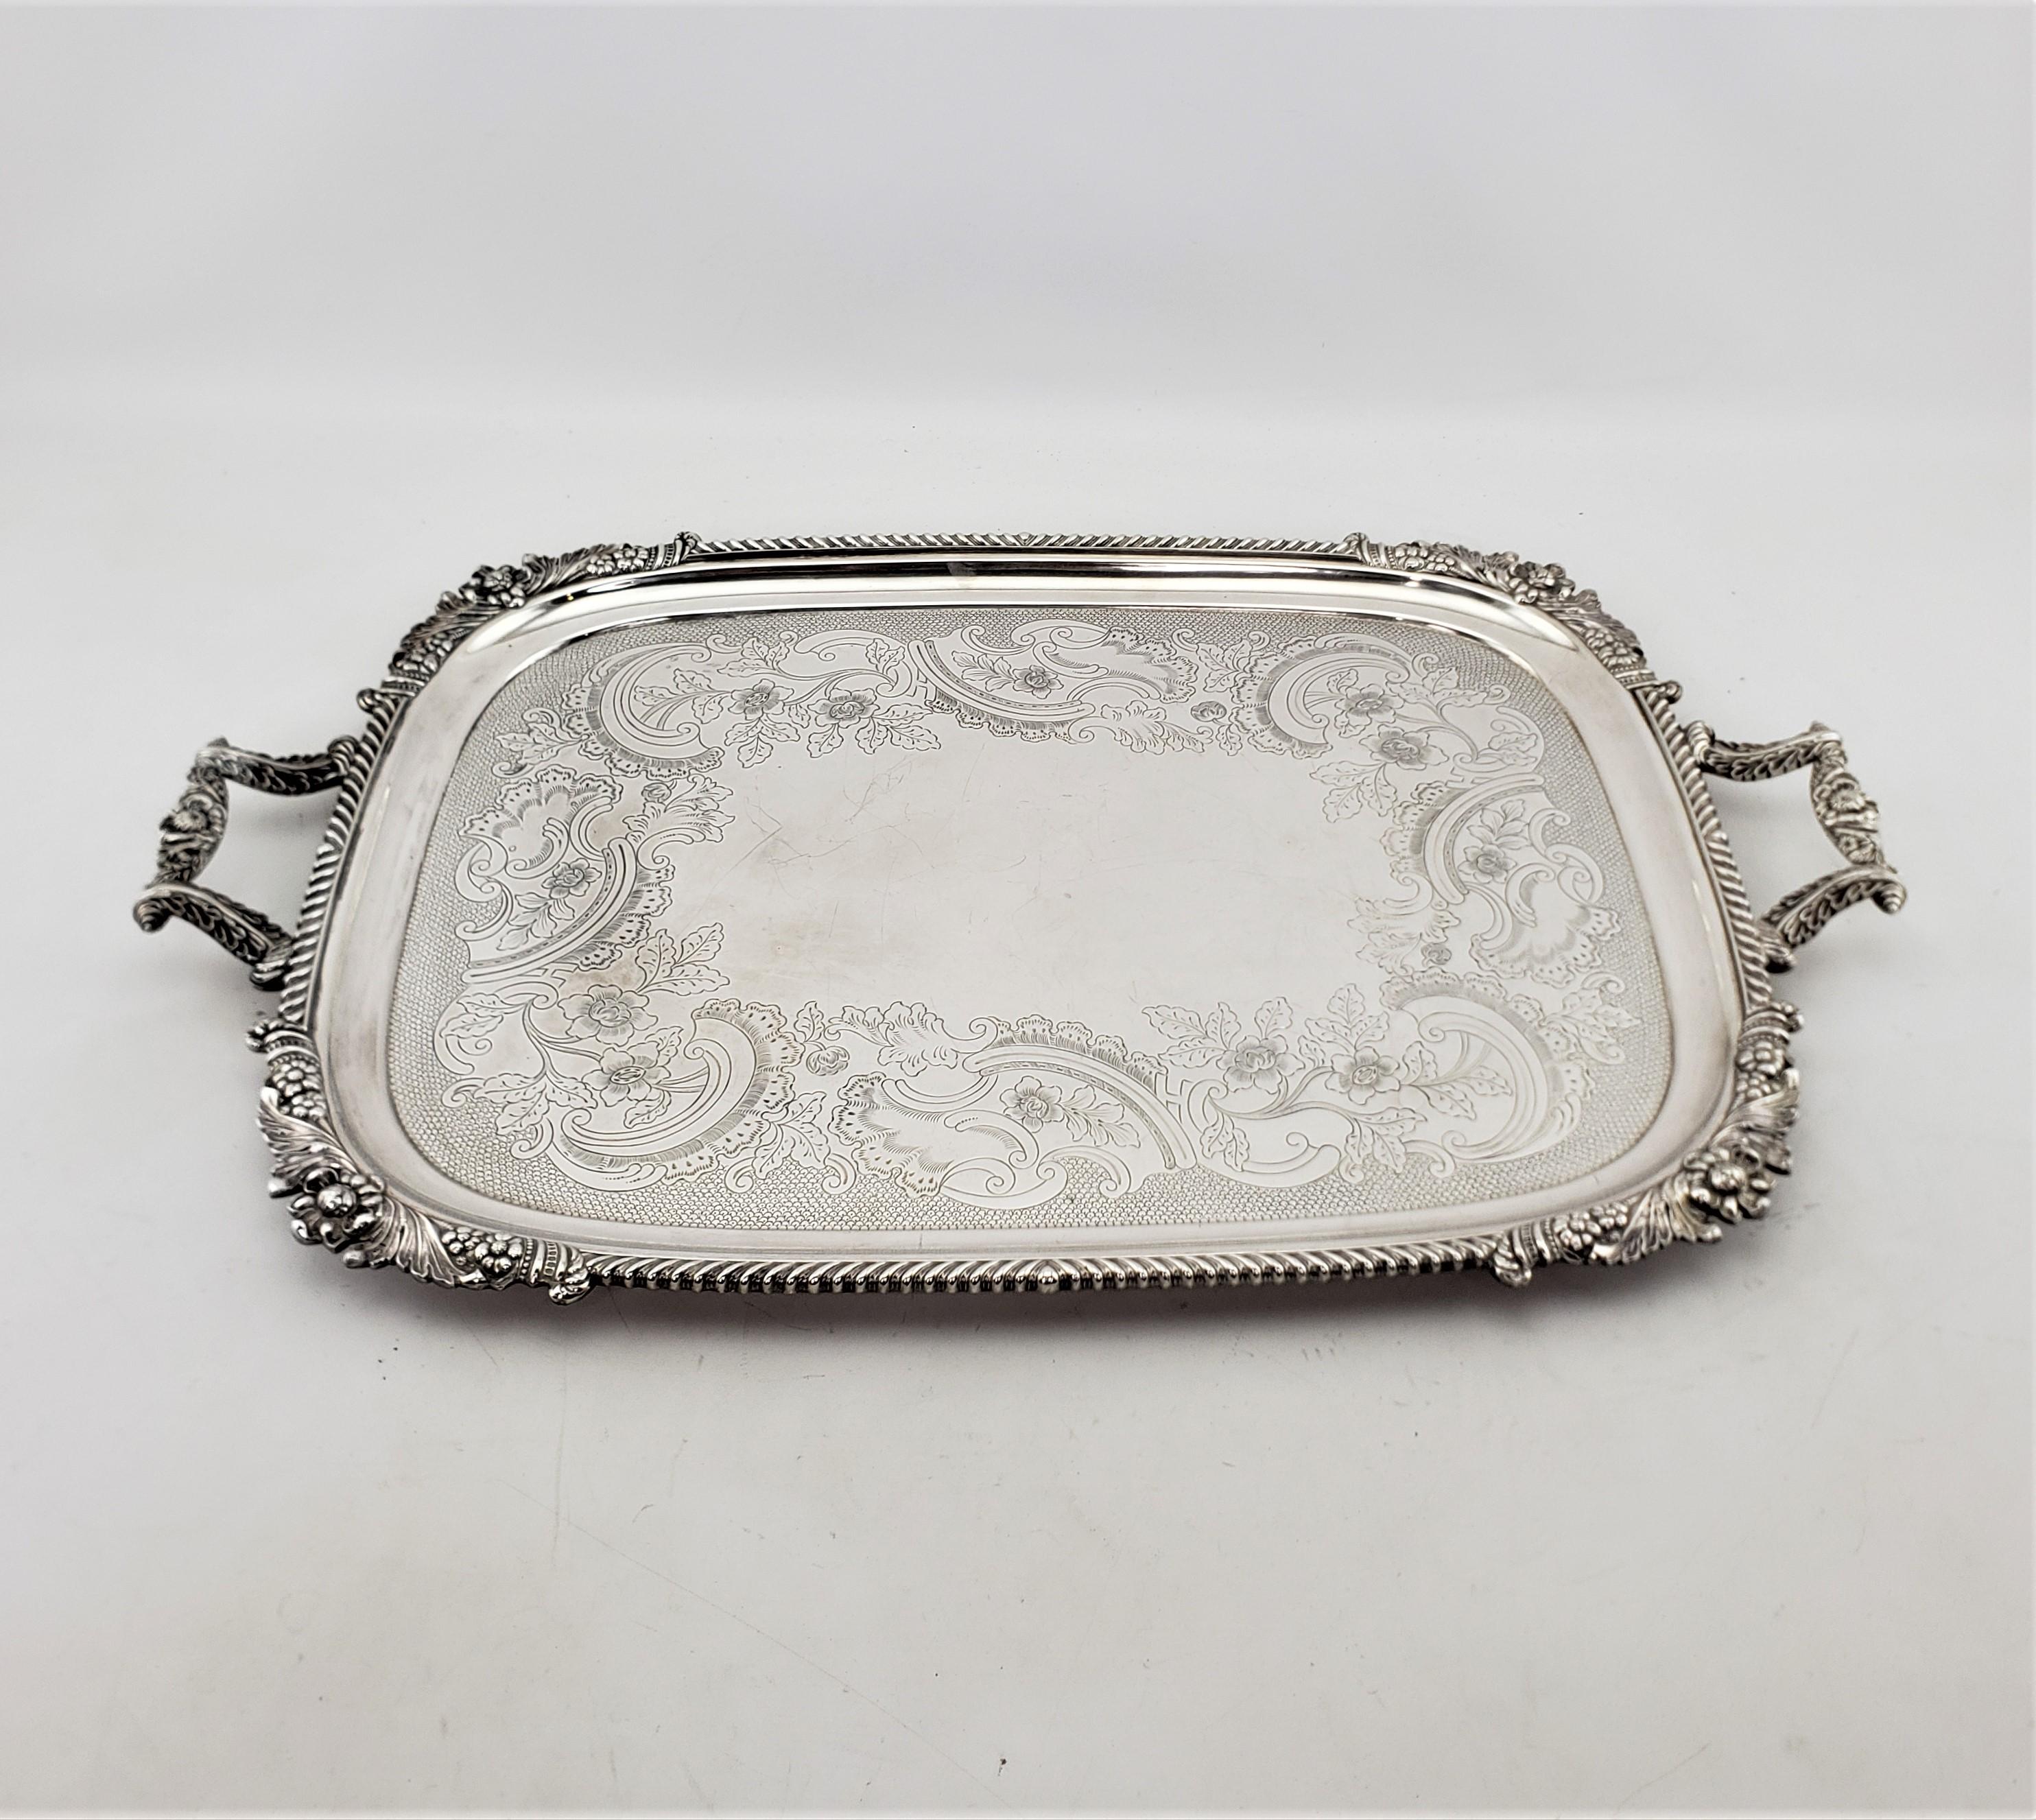 Large Barker Ellis Antique Silver Plated Serving Tray with Floral Decoration In Good Condition For Sale In Hamilton, Ontario